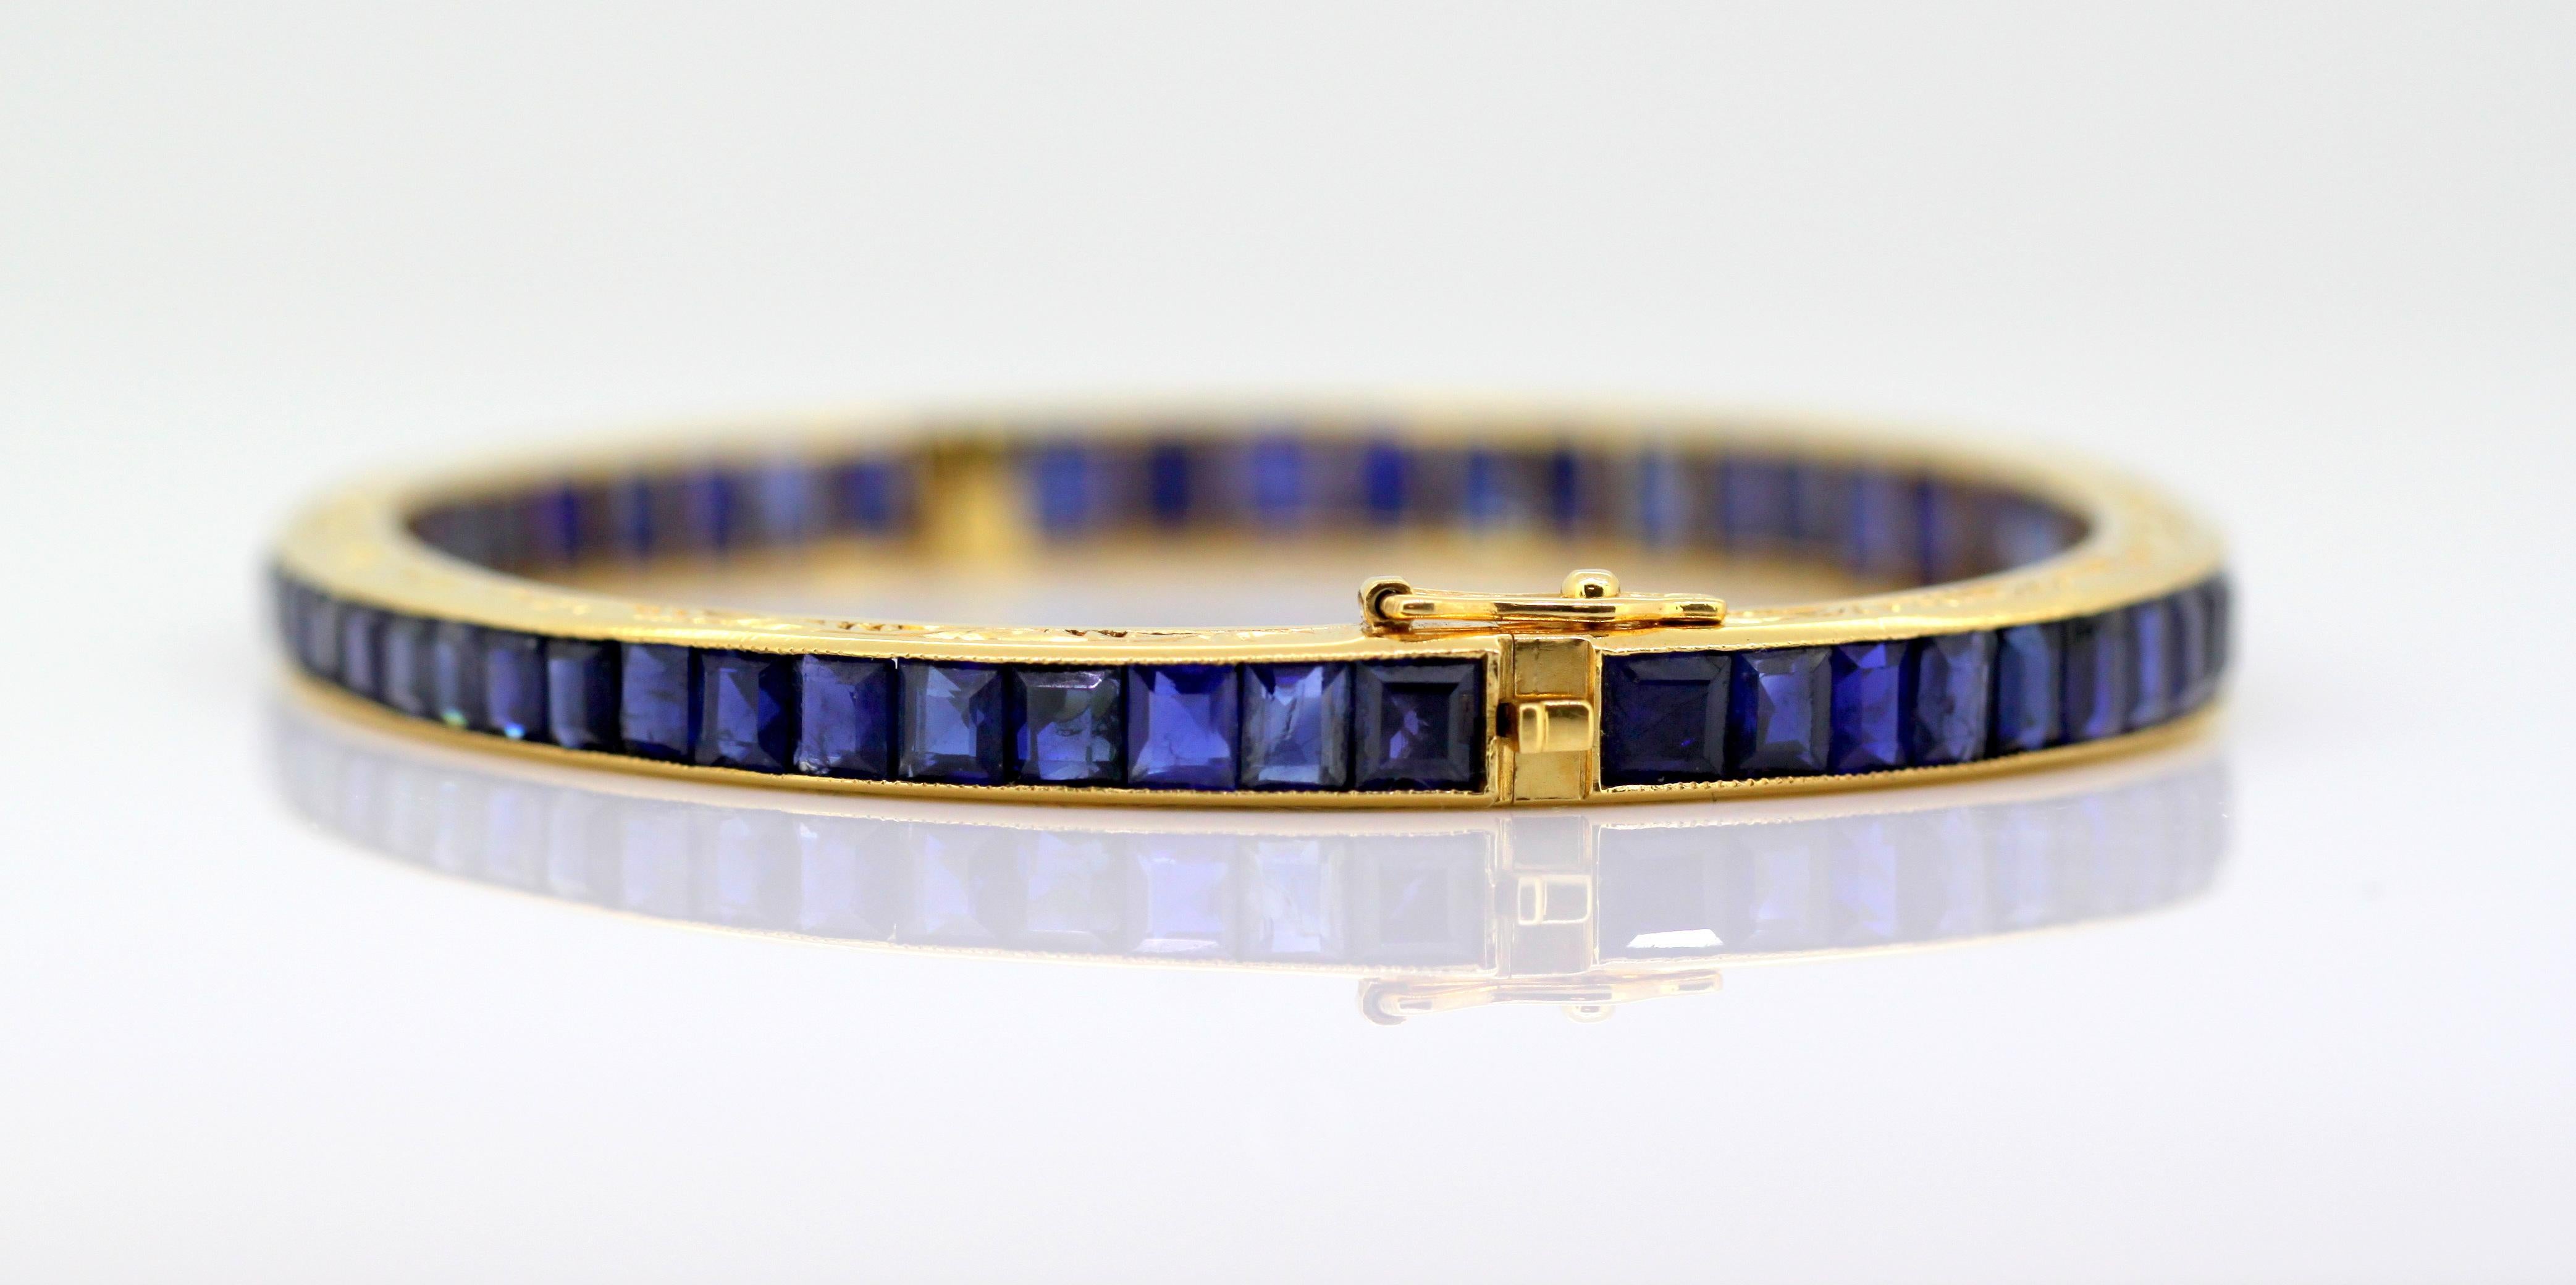 Antique Art Deco 18k gold ladies bangle with Burmese natural corundum sapphire.
Made in France Circa 1920's

Dimensions -
Size : 6.3 x 5.5 x 0.55 cm
Weight : 17 grams

Sapphires -
Total Weight : 16.5 CT Approx
Shape : Calibrated cut
Colour :